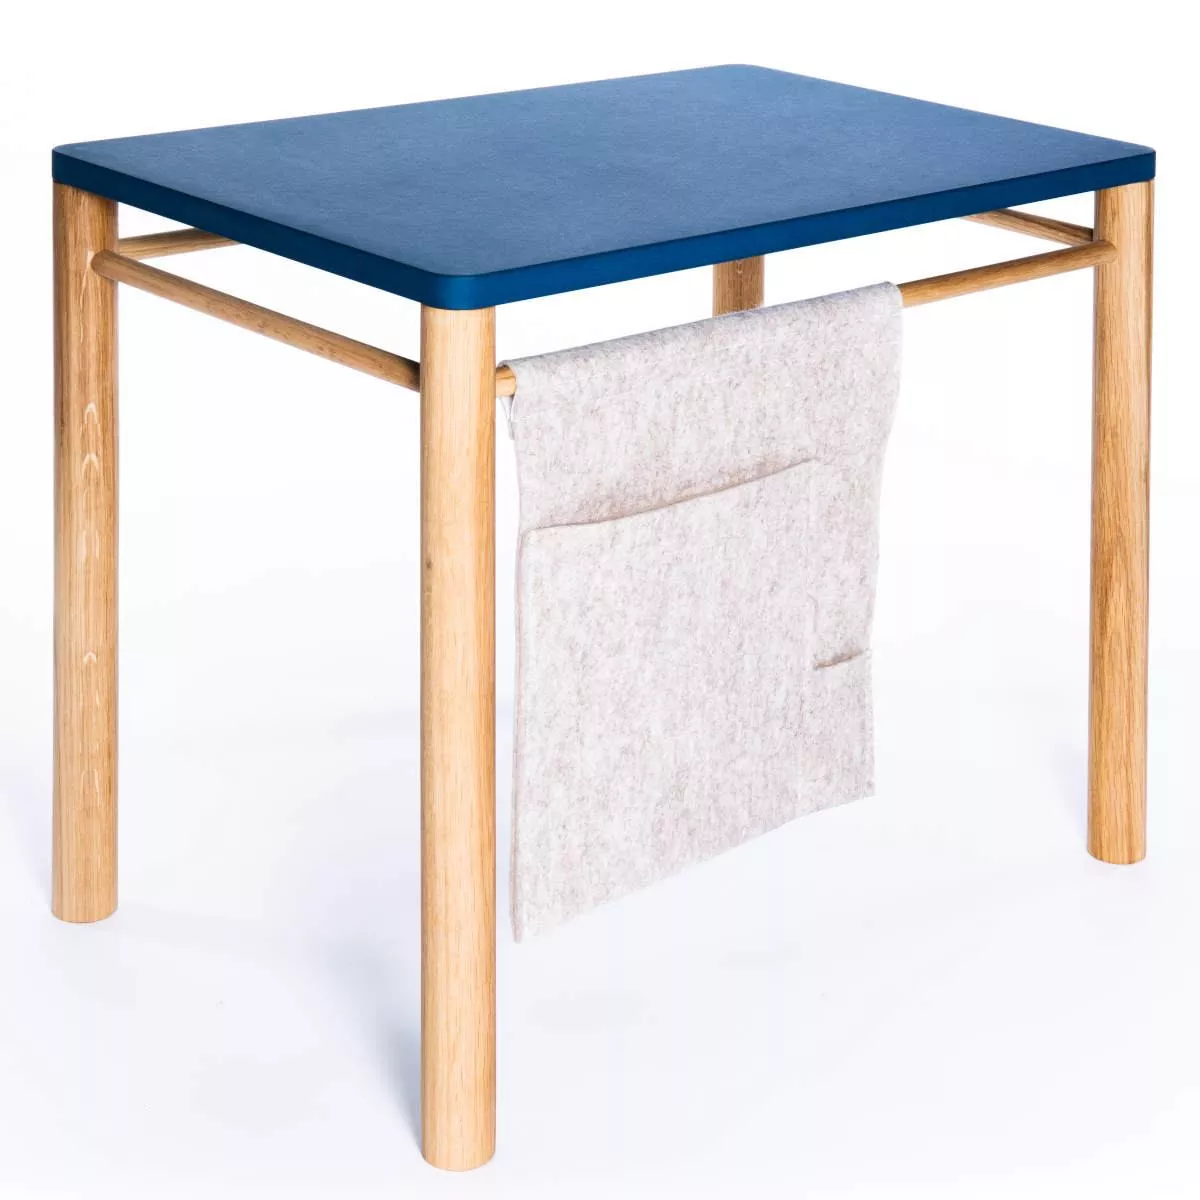 Children's table (sold separately) with felt bag